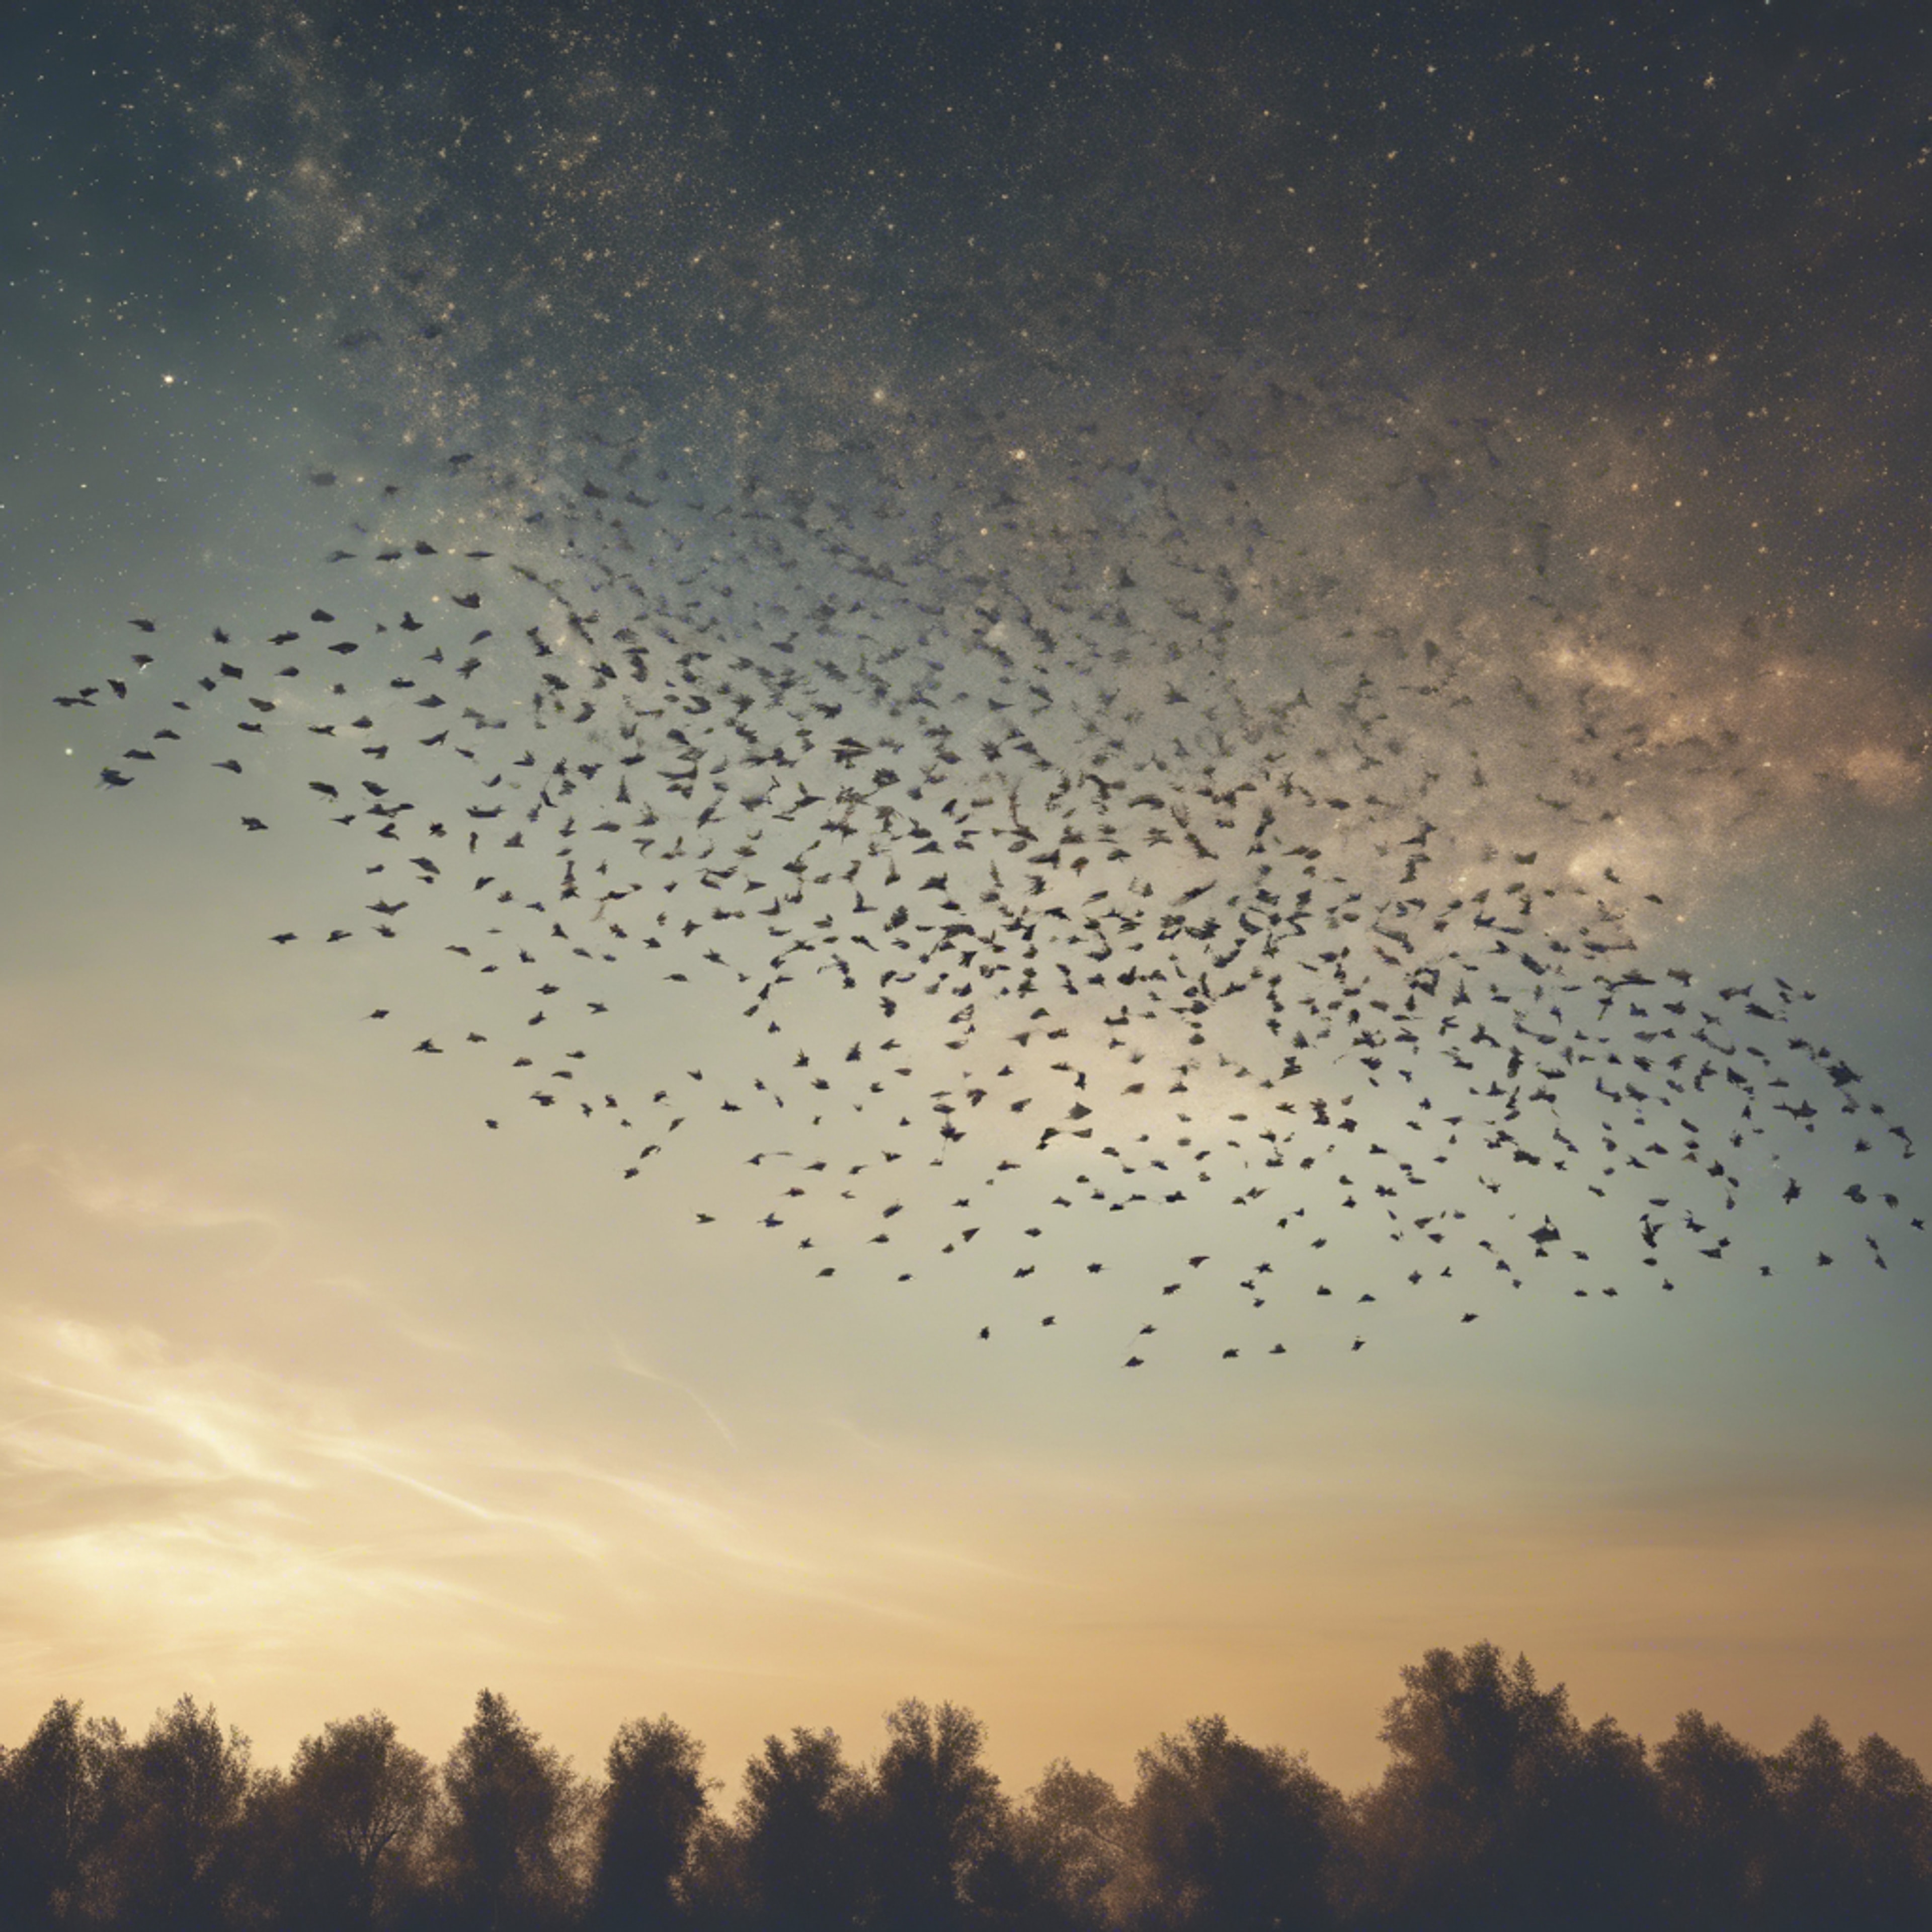 A flock of birds migrating in a formation under the beautiful canvas of the star-filled sky. Wallpaper[484e39501ed147fa9155]